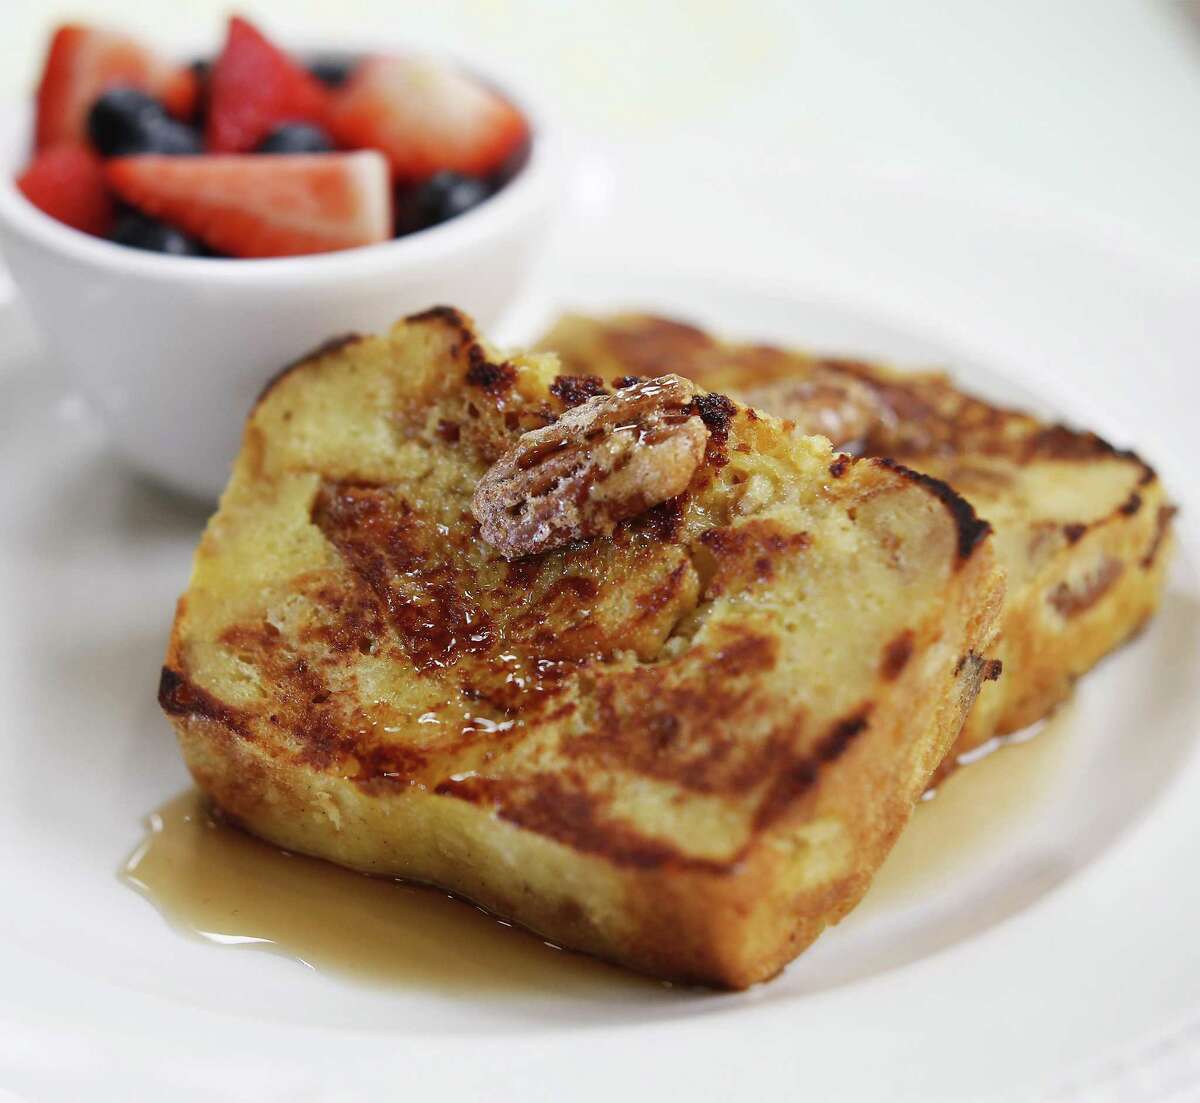 French toast at The Bread Box